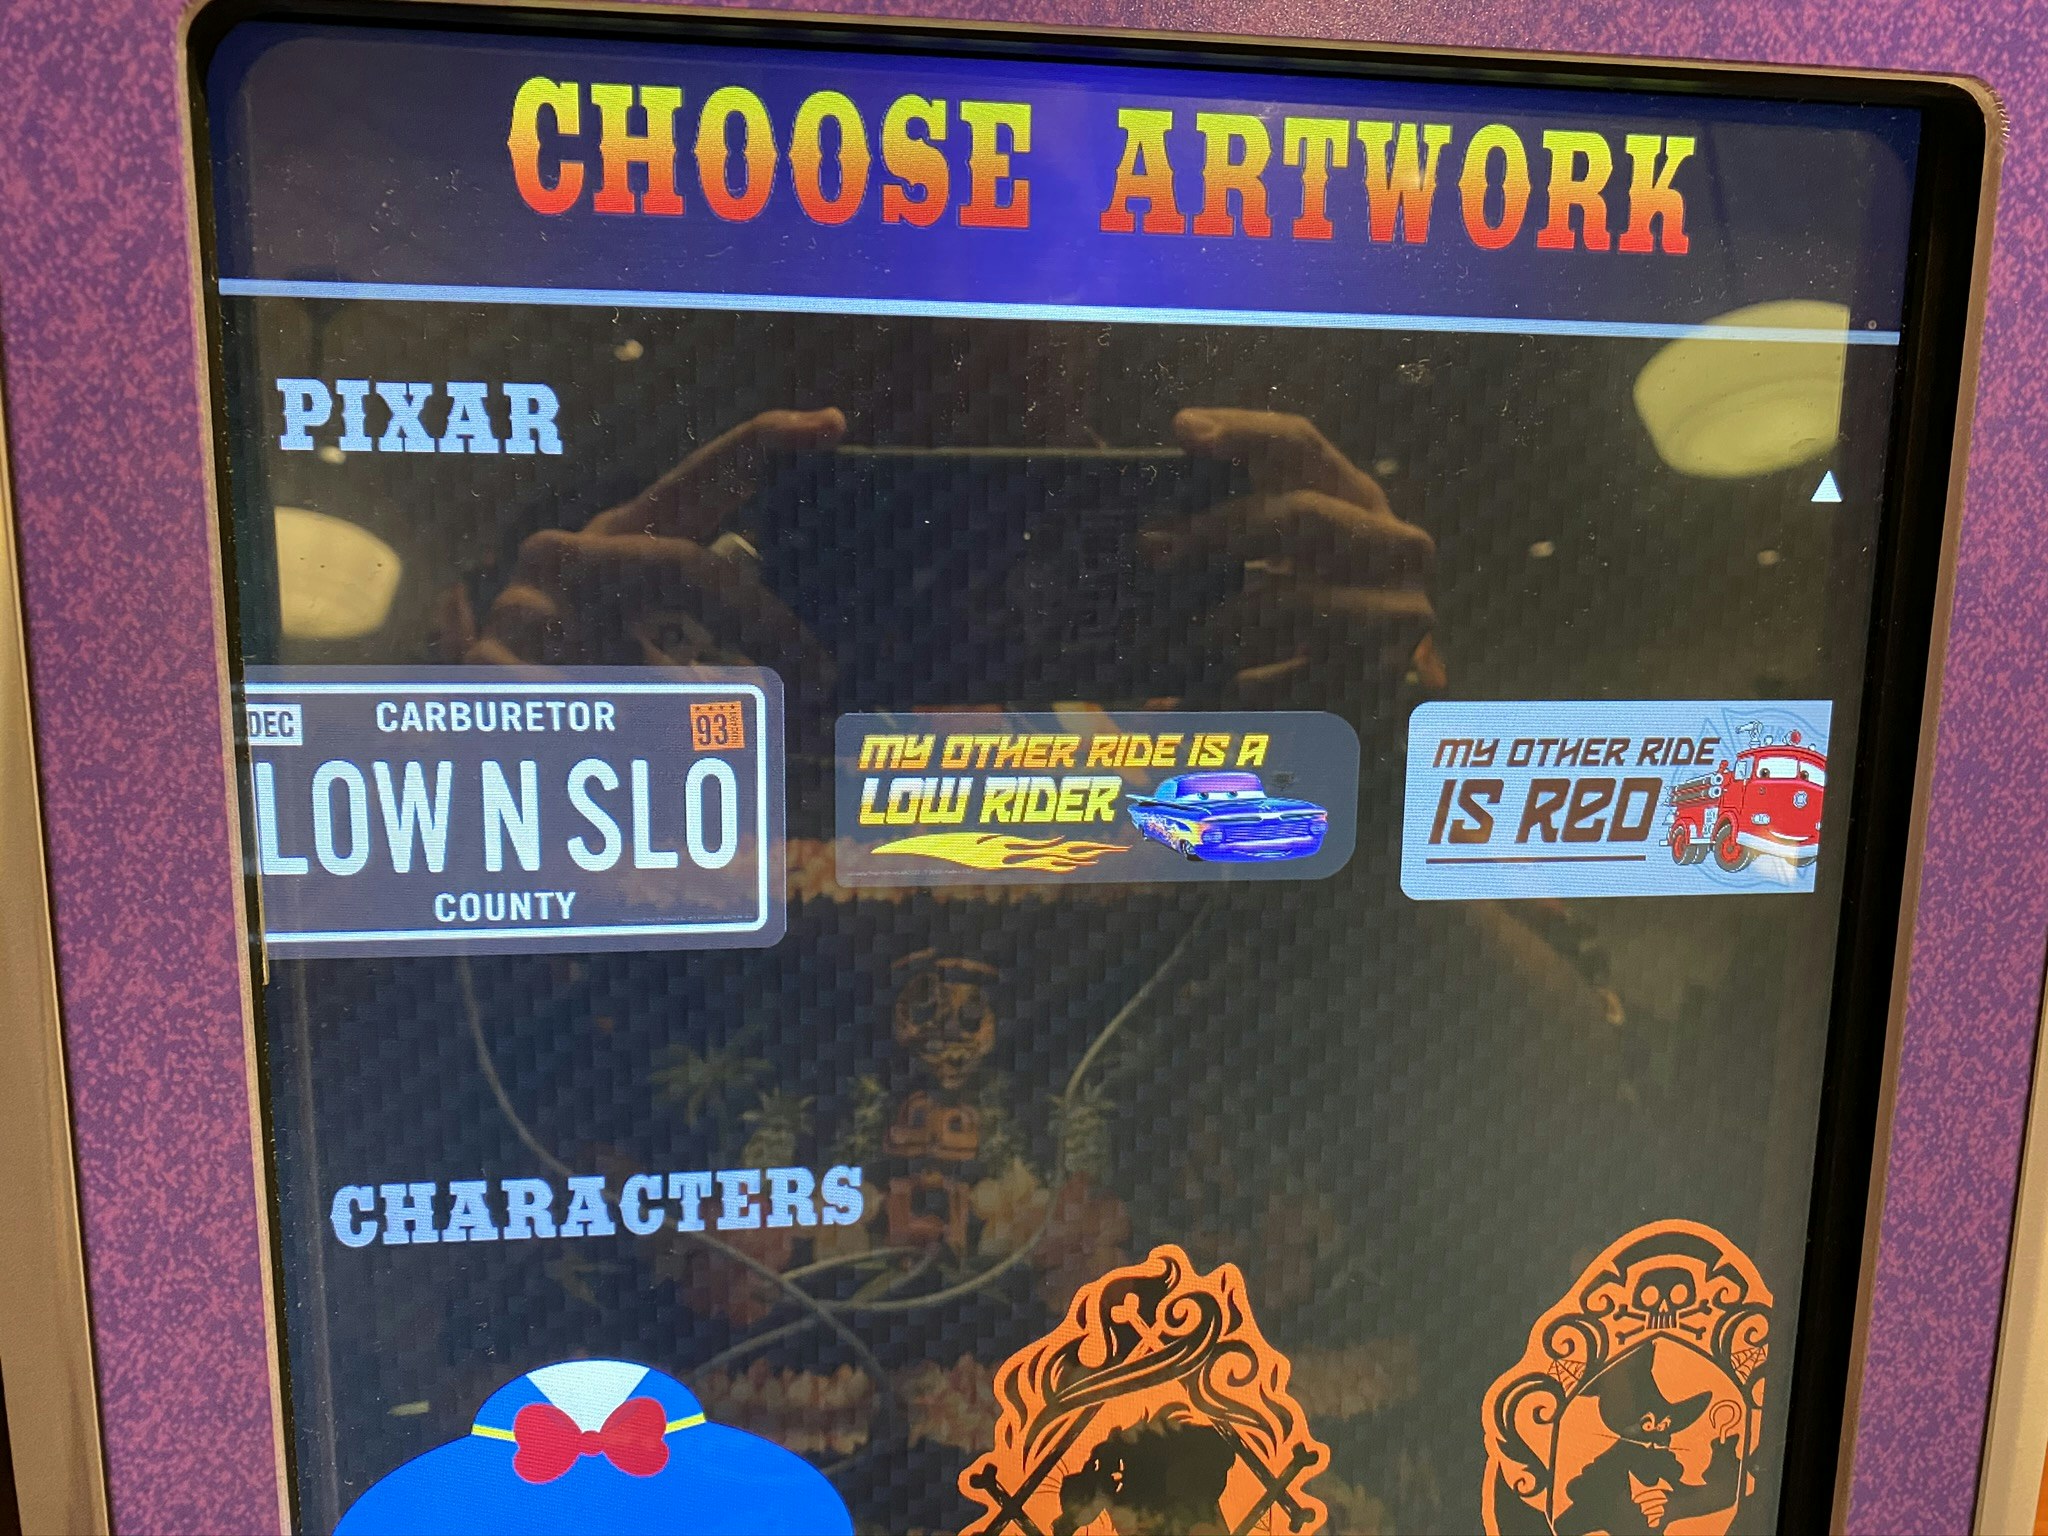 https://wdwnt.com/2020/02/photos-new-made-by-you-t-shirt-customization-kiosk-debuts-at-disney-springs/